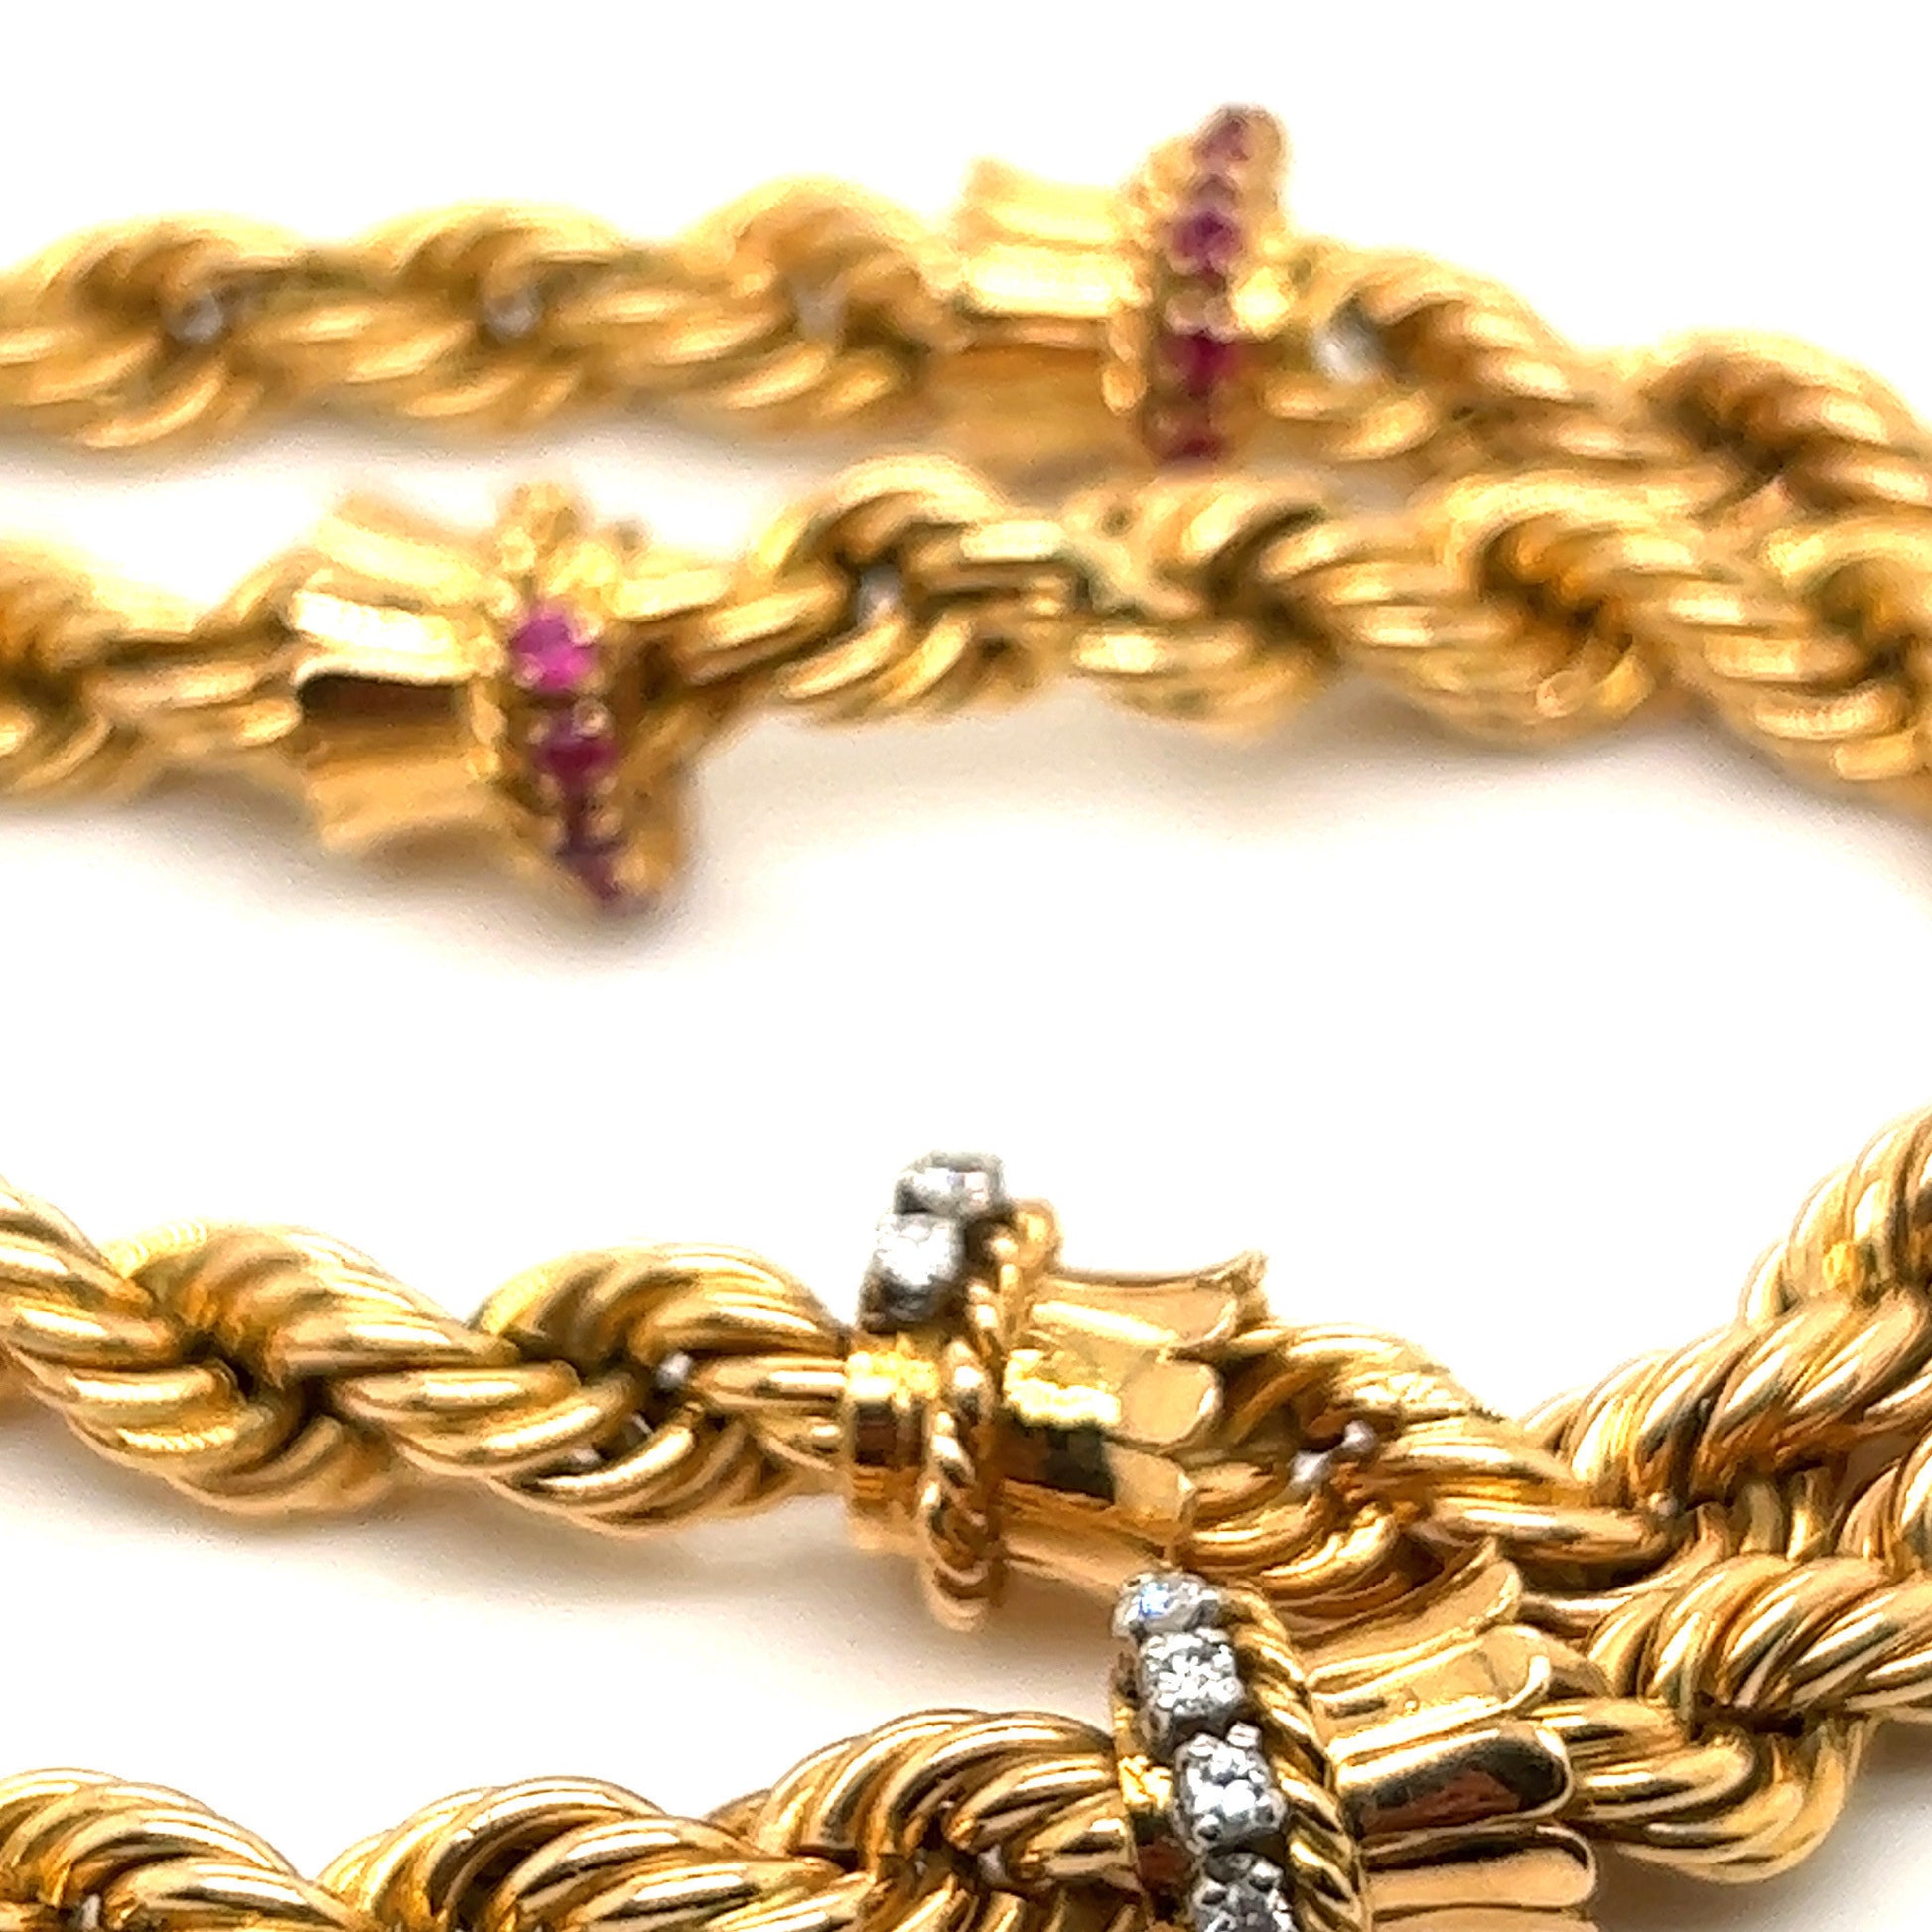 Lacloche Freres Paris 1950s 18KT Yellow Gold Diamond & Ruby Necklace close-up details